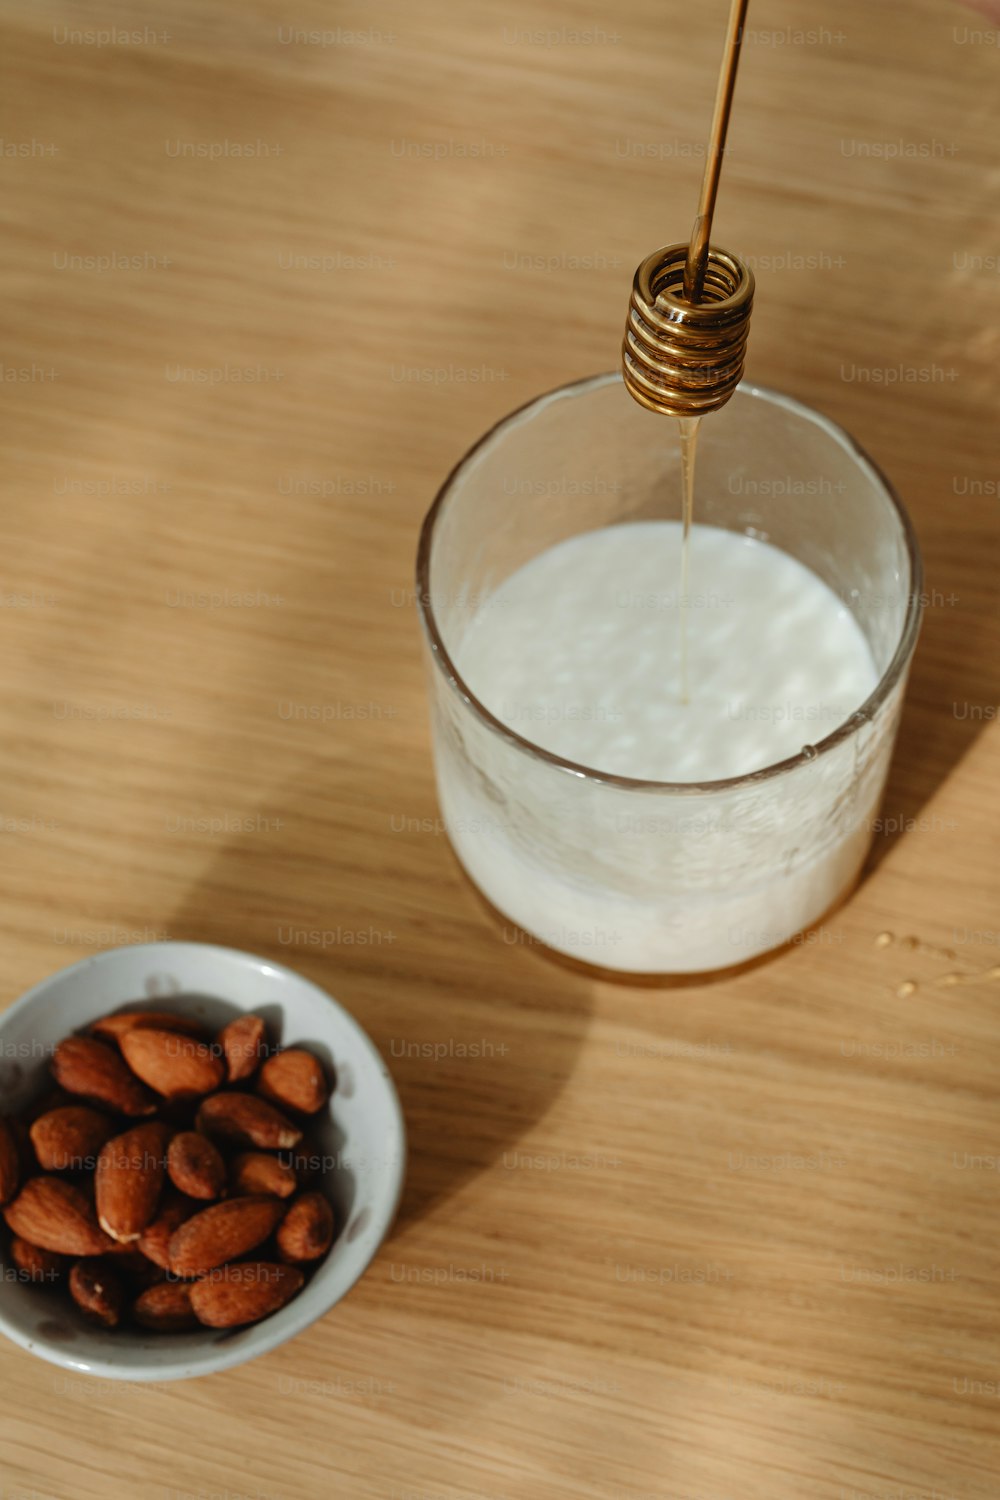 a bowl of almonds next to a glass of milk